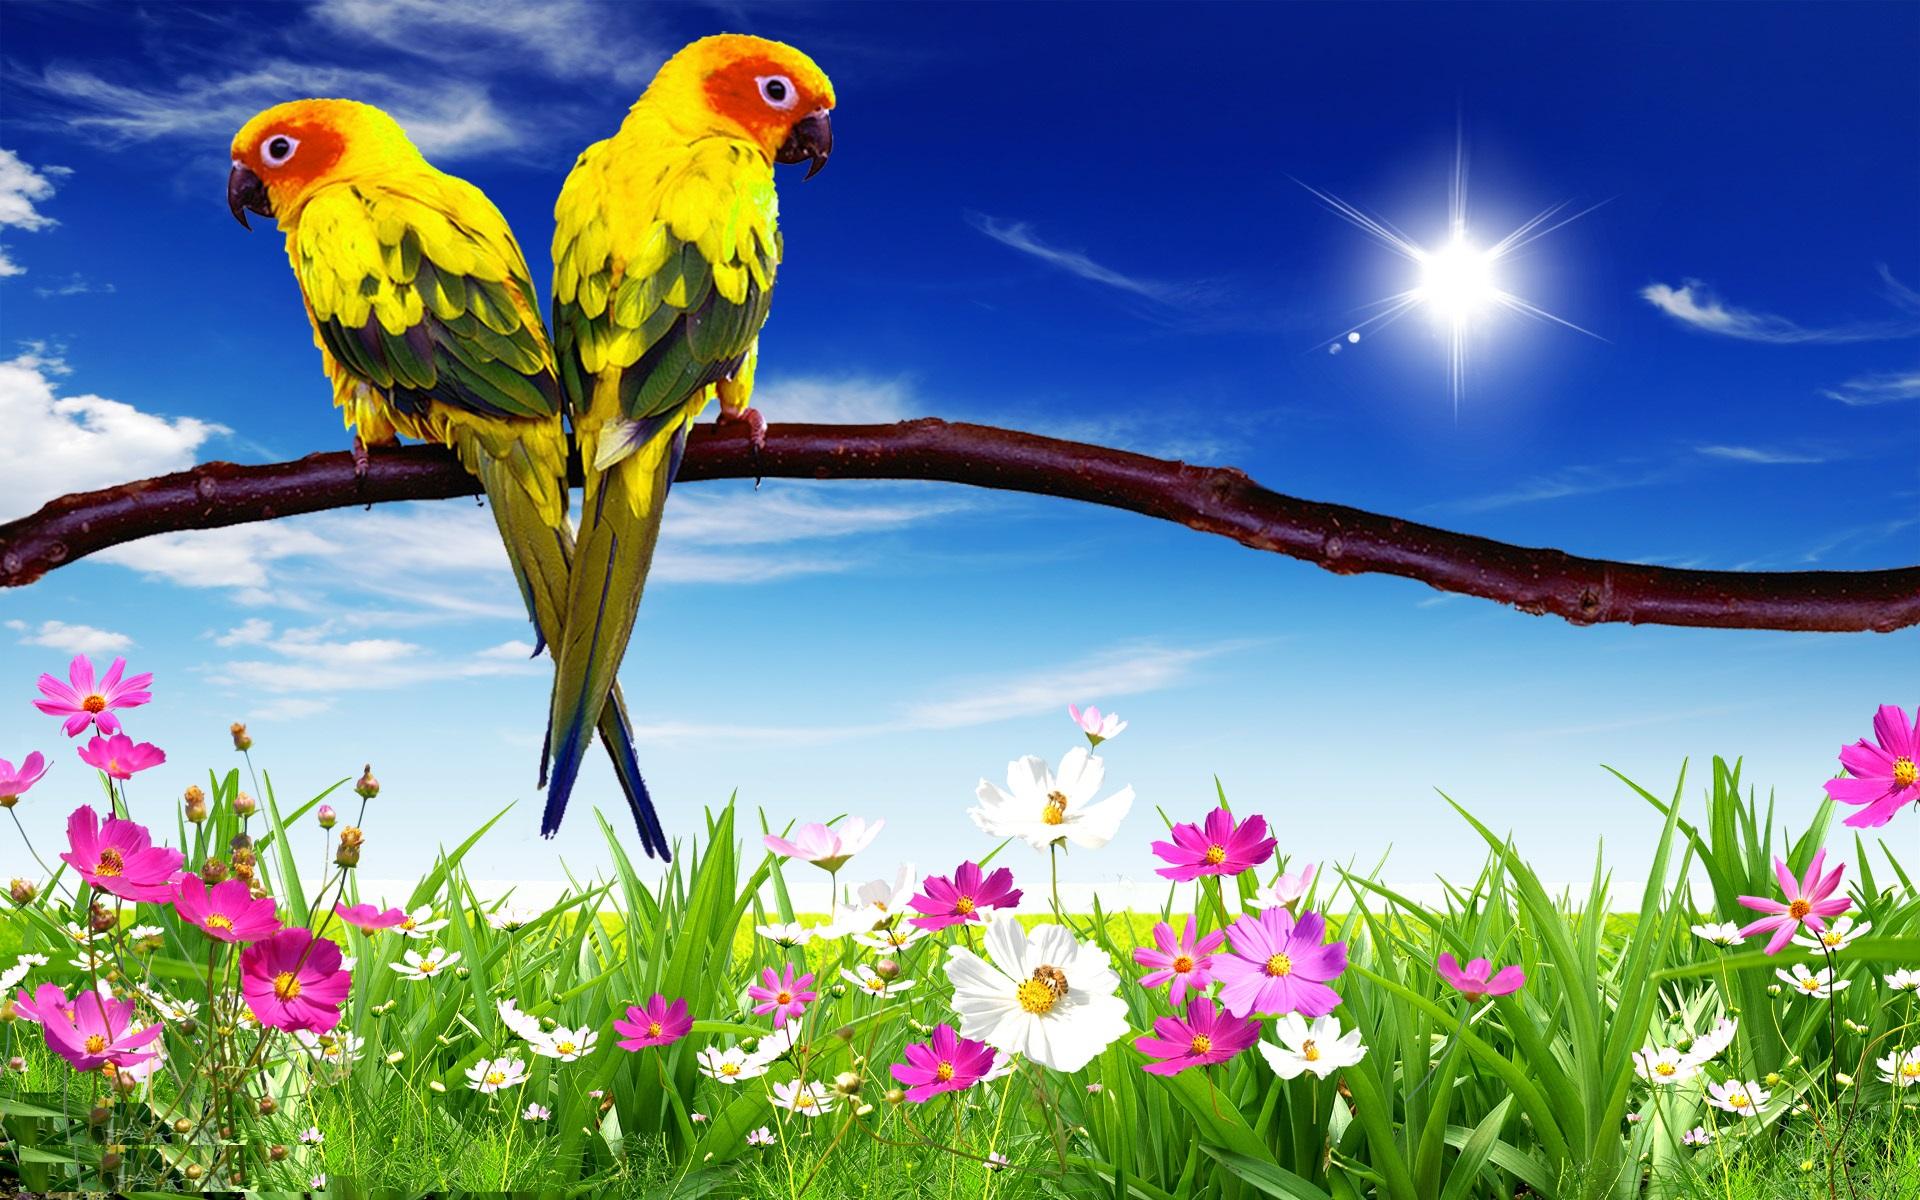 Colorful Parrots First HD Wallpaper Wpt7603166